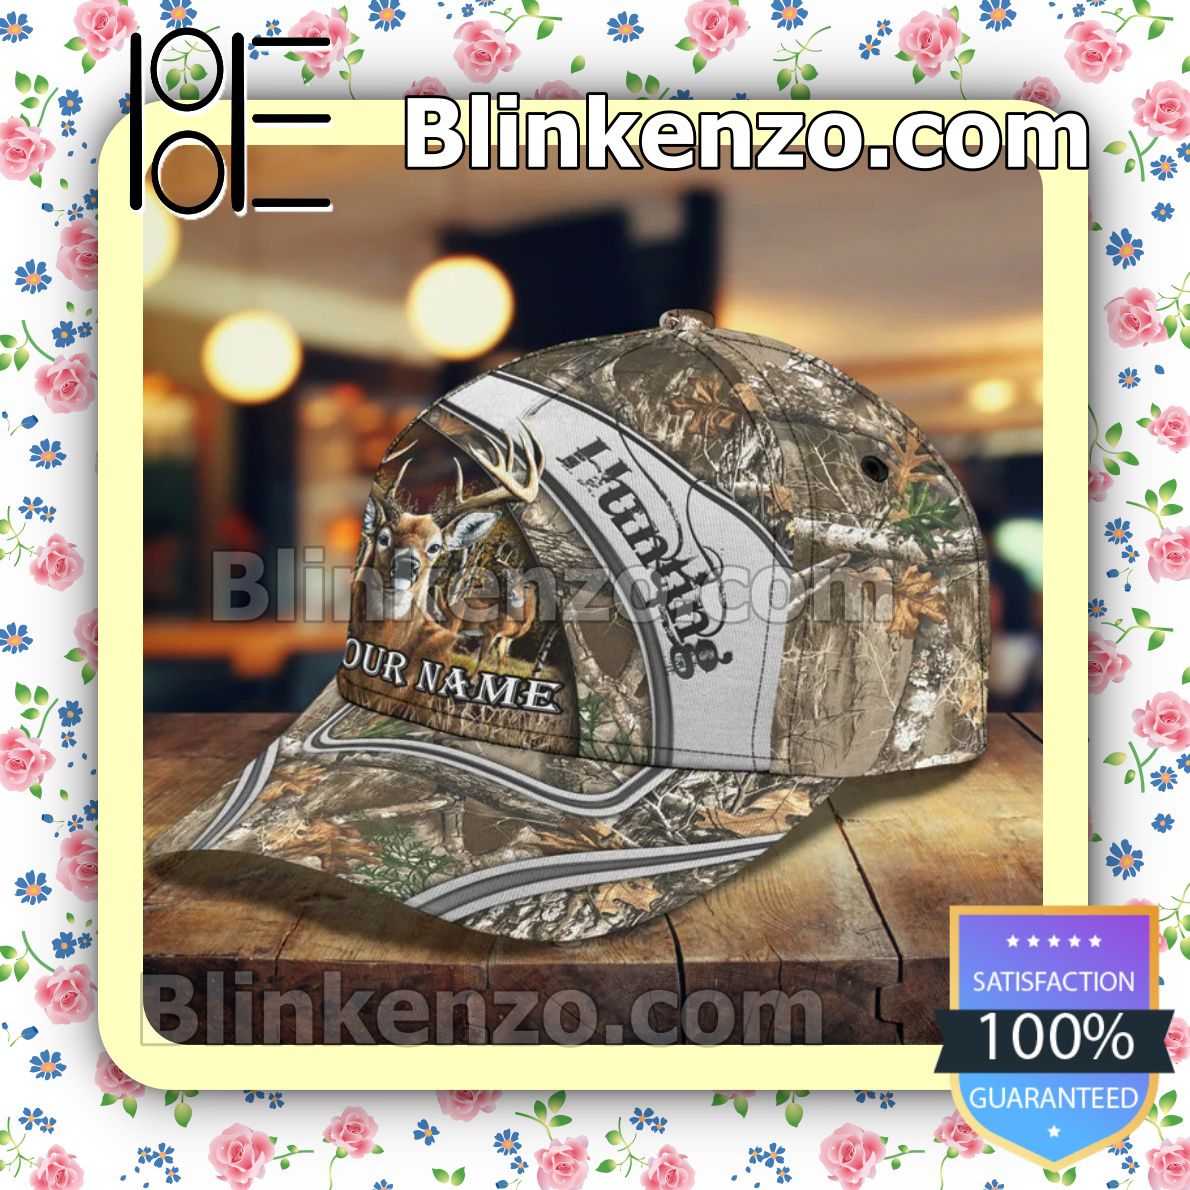 Top Selling Personalized Deer Hunting Baseball Caps Gift For Boyfriend